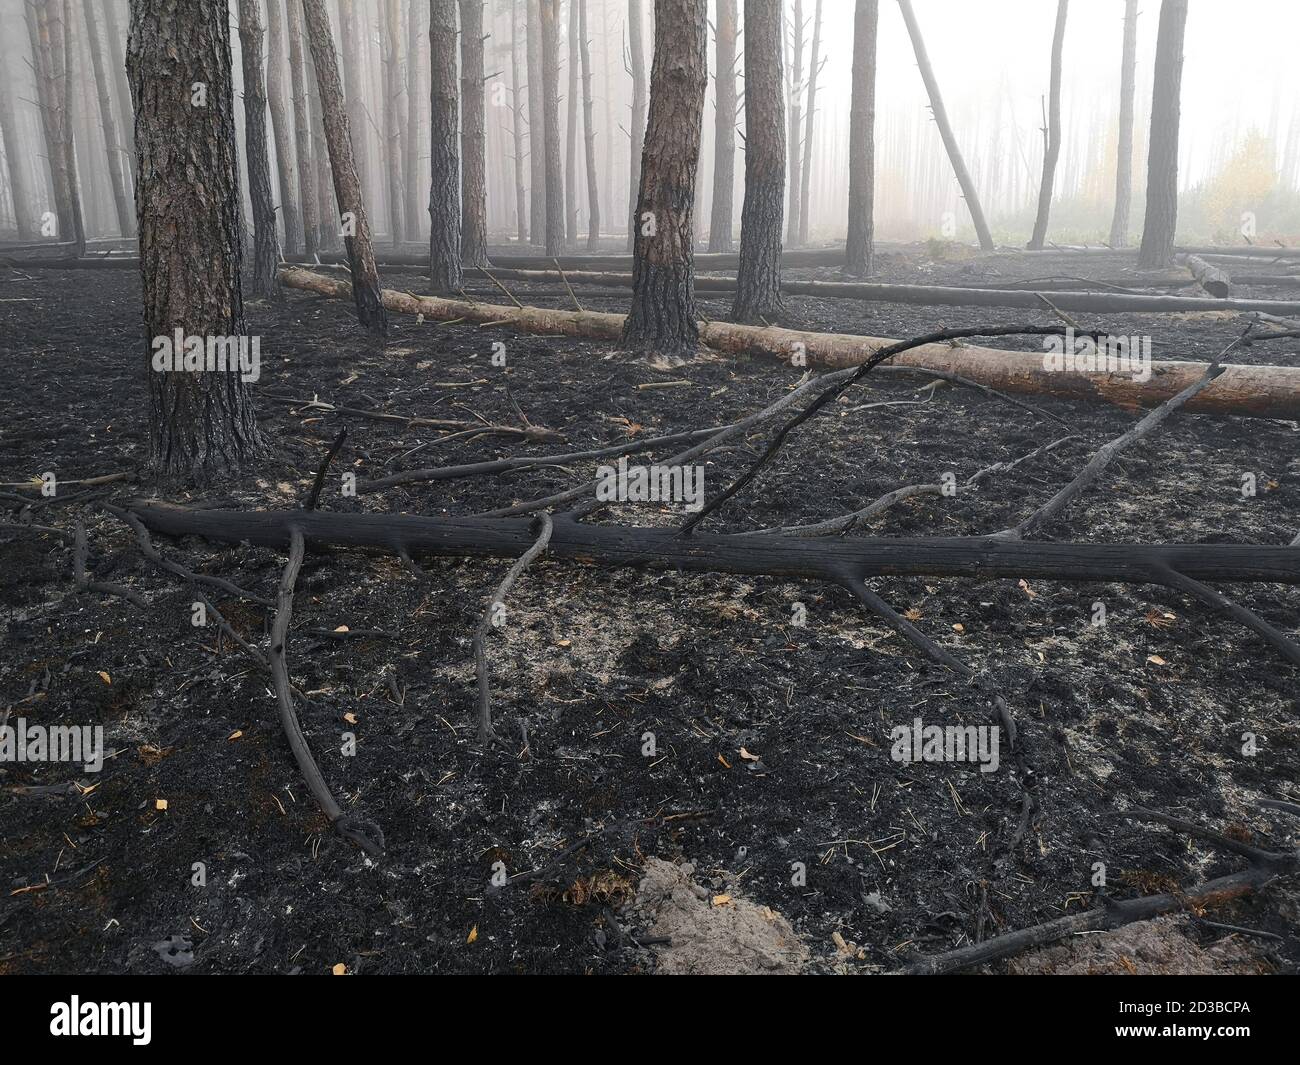 Peatlands are on fire. Forest fire and its consequences Stock Photo